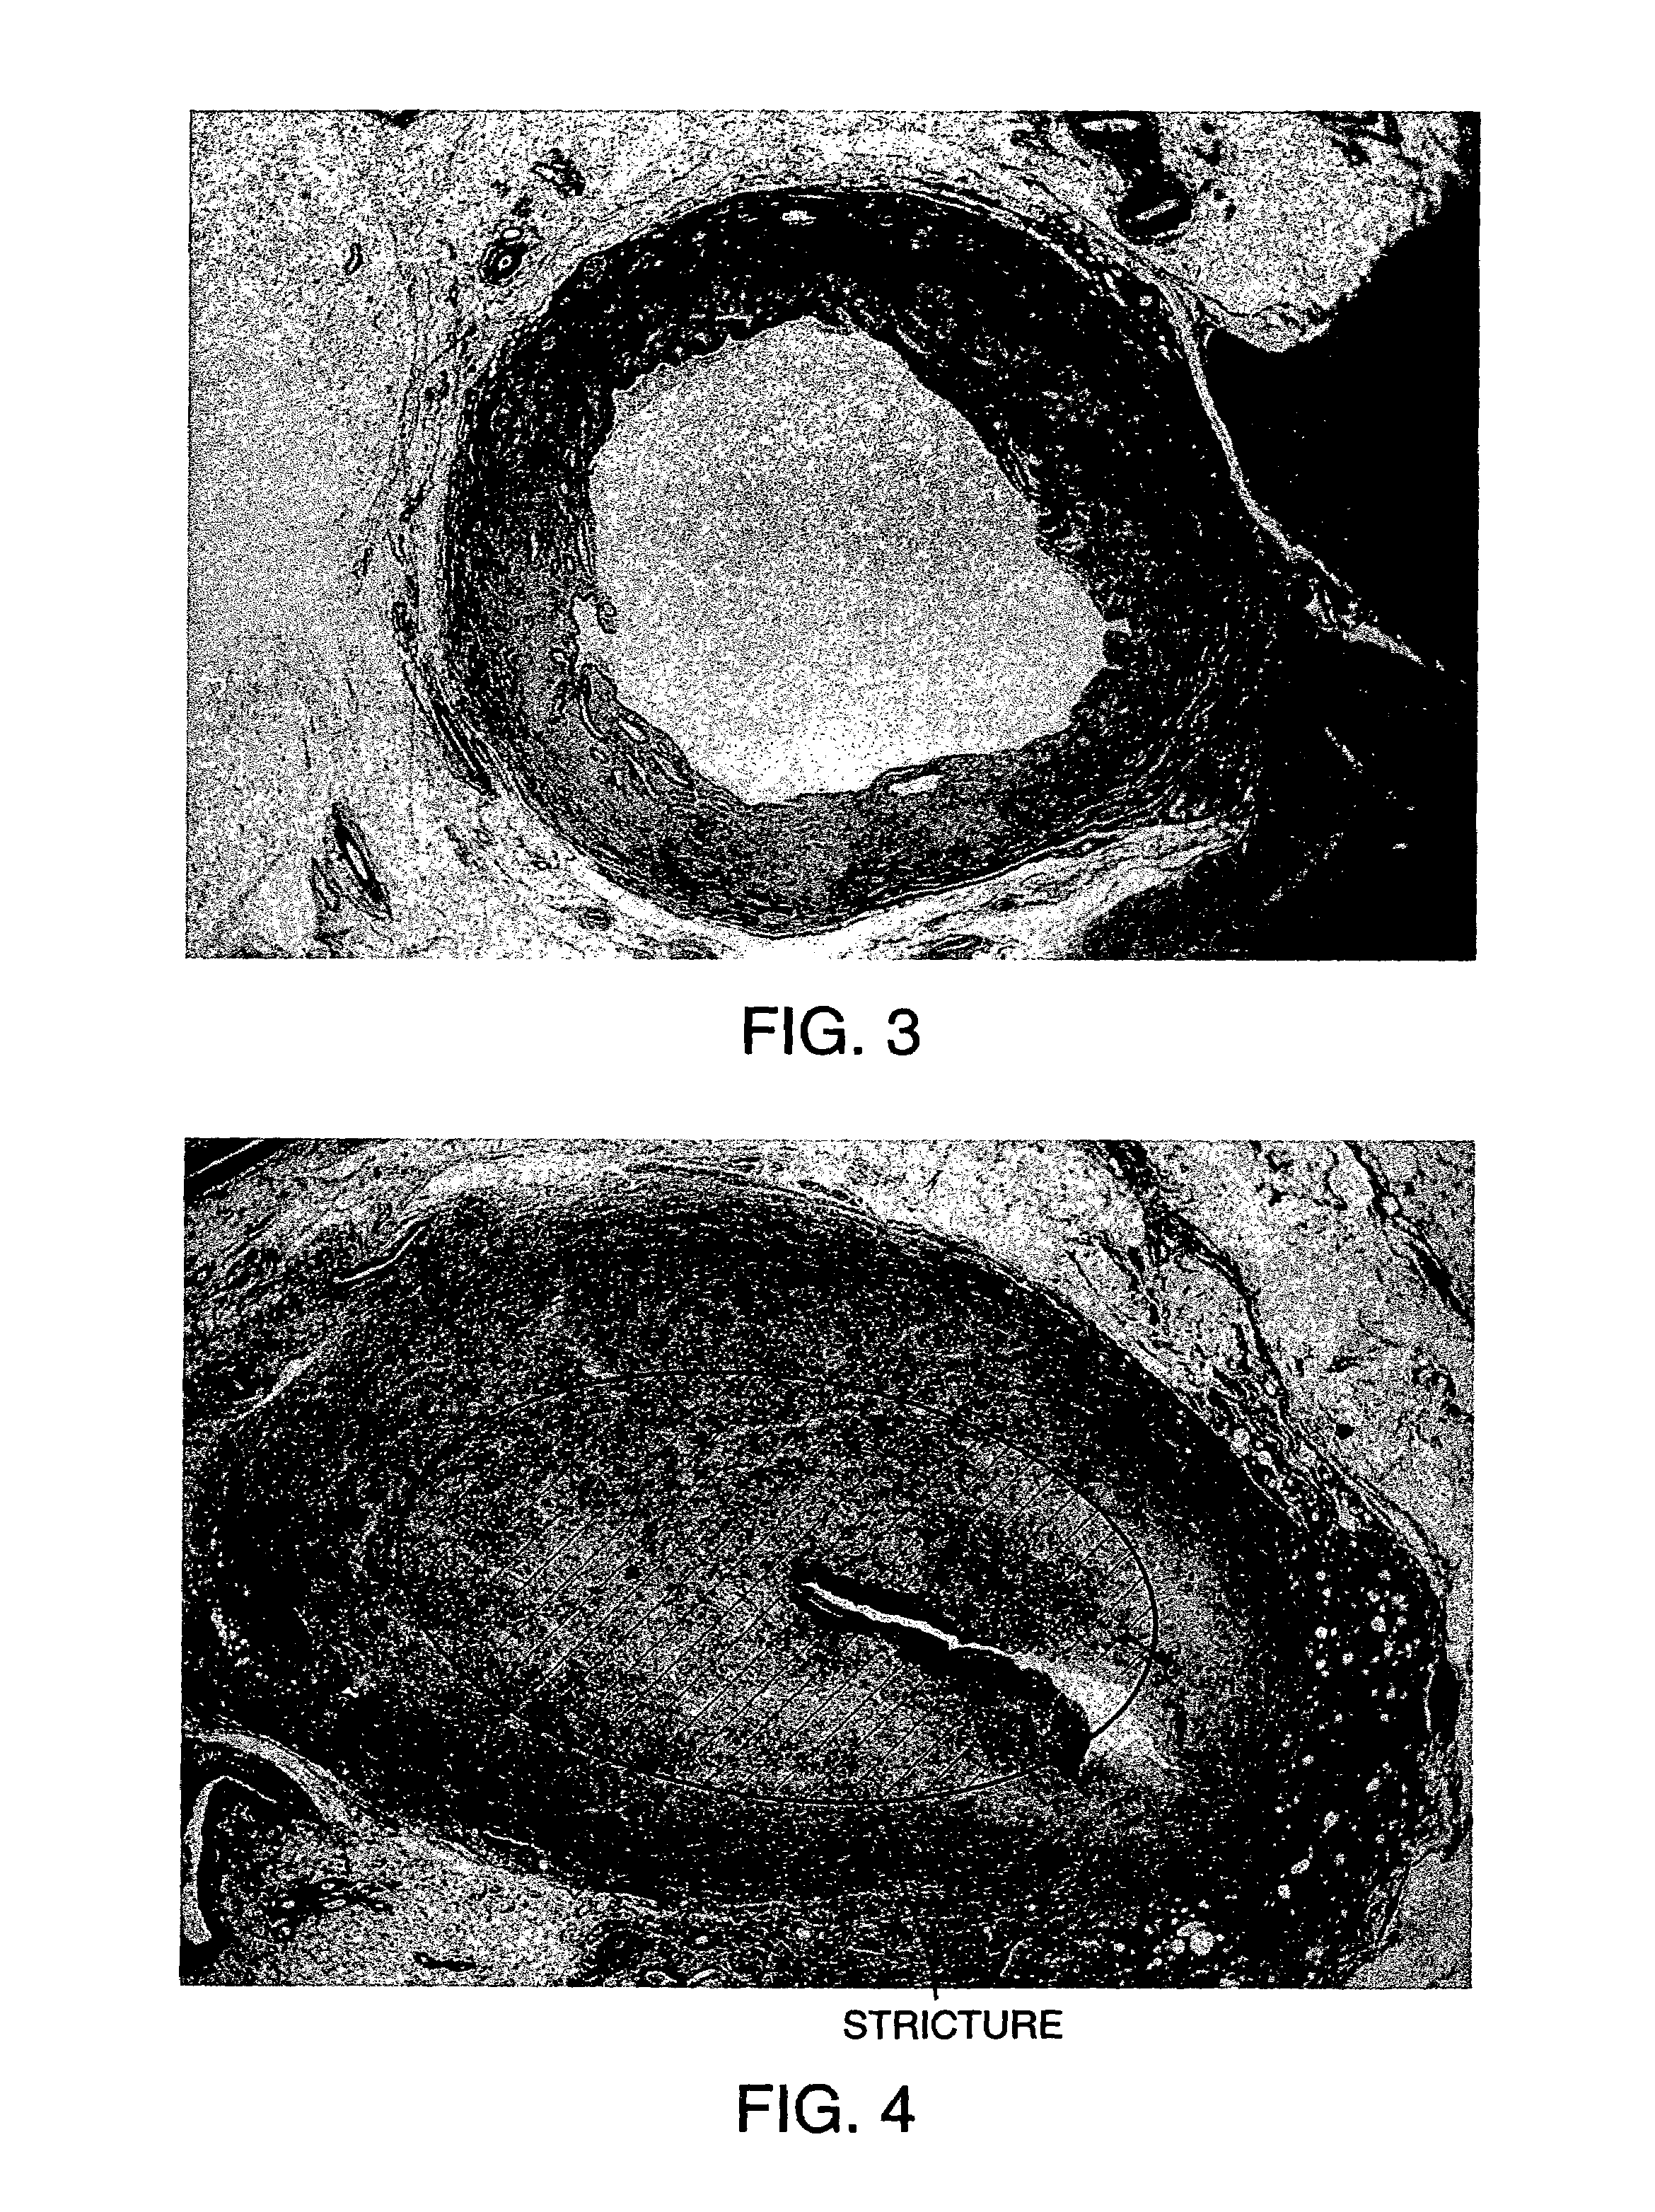 Methods for treating an artery or vein in a human subject